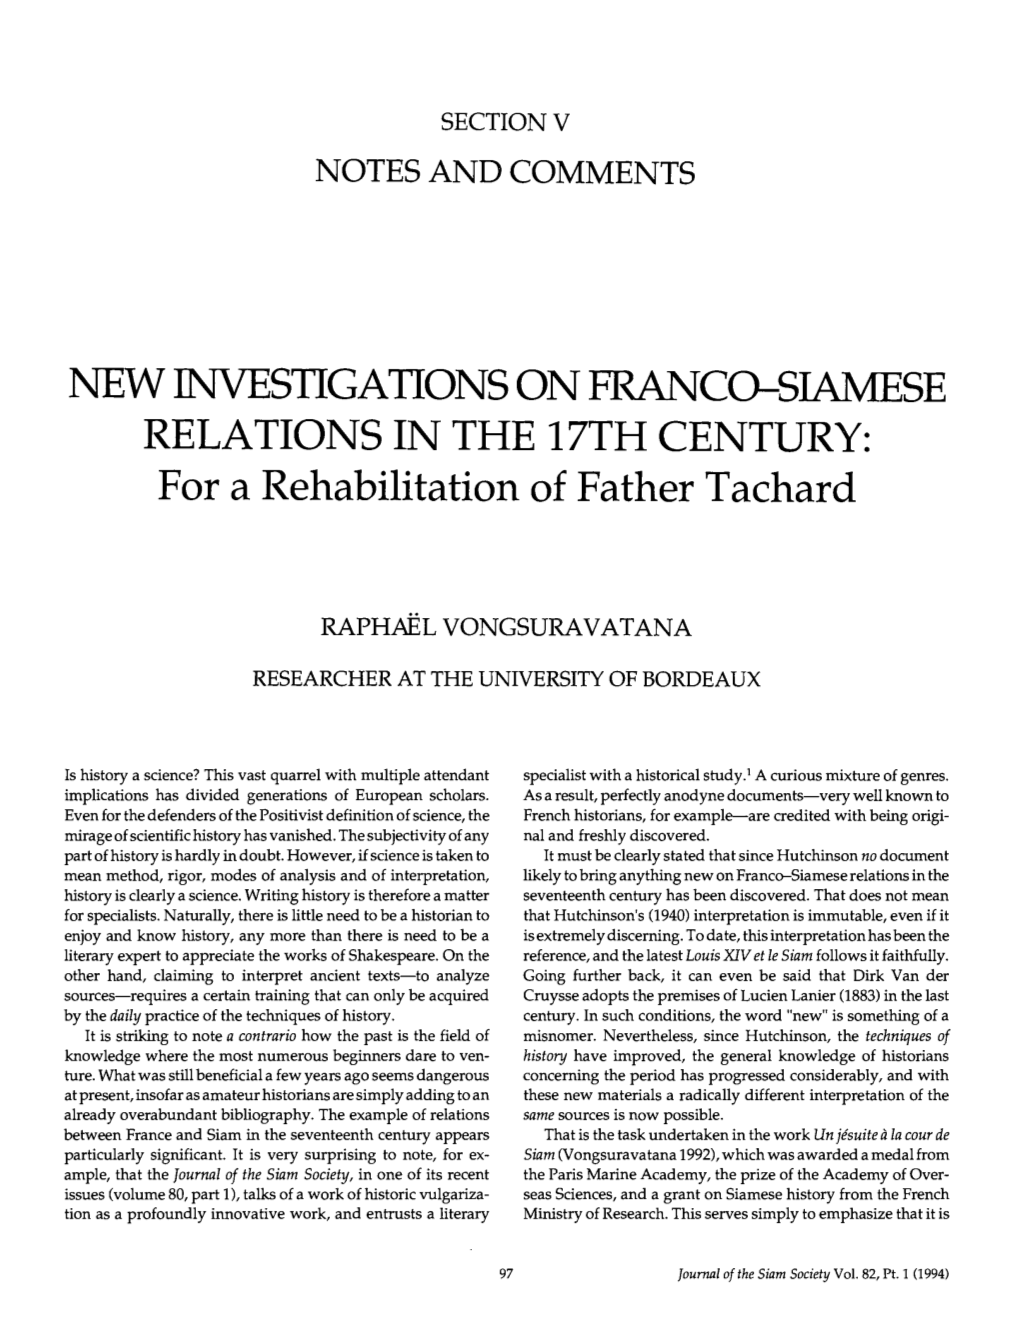 NEW INVESTIGATIONS on FRANCO-SIAMESE RELATIONS in the 17TH CENTURY: for a Rehabilitation of Father Tachard